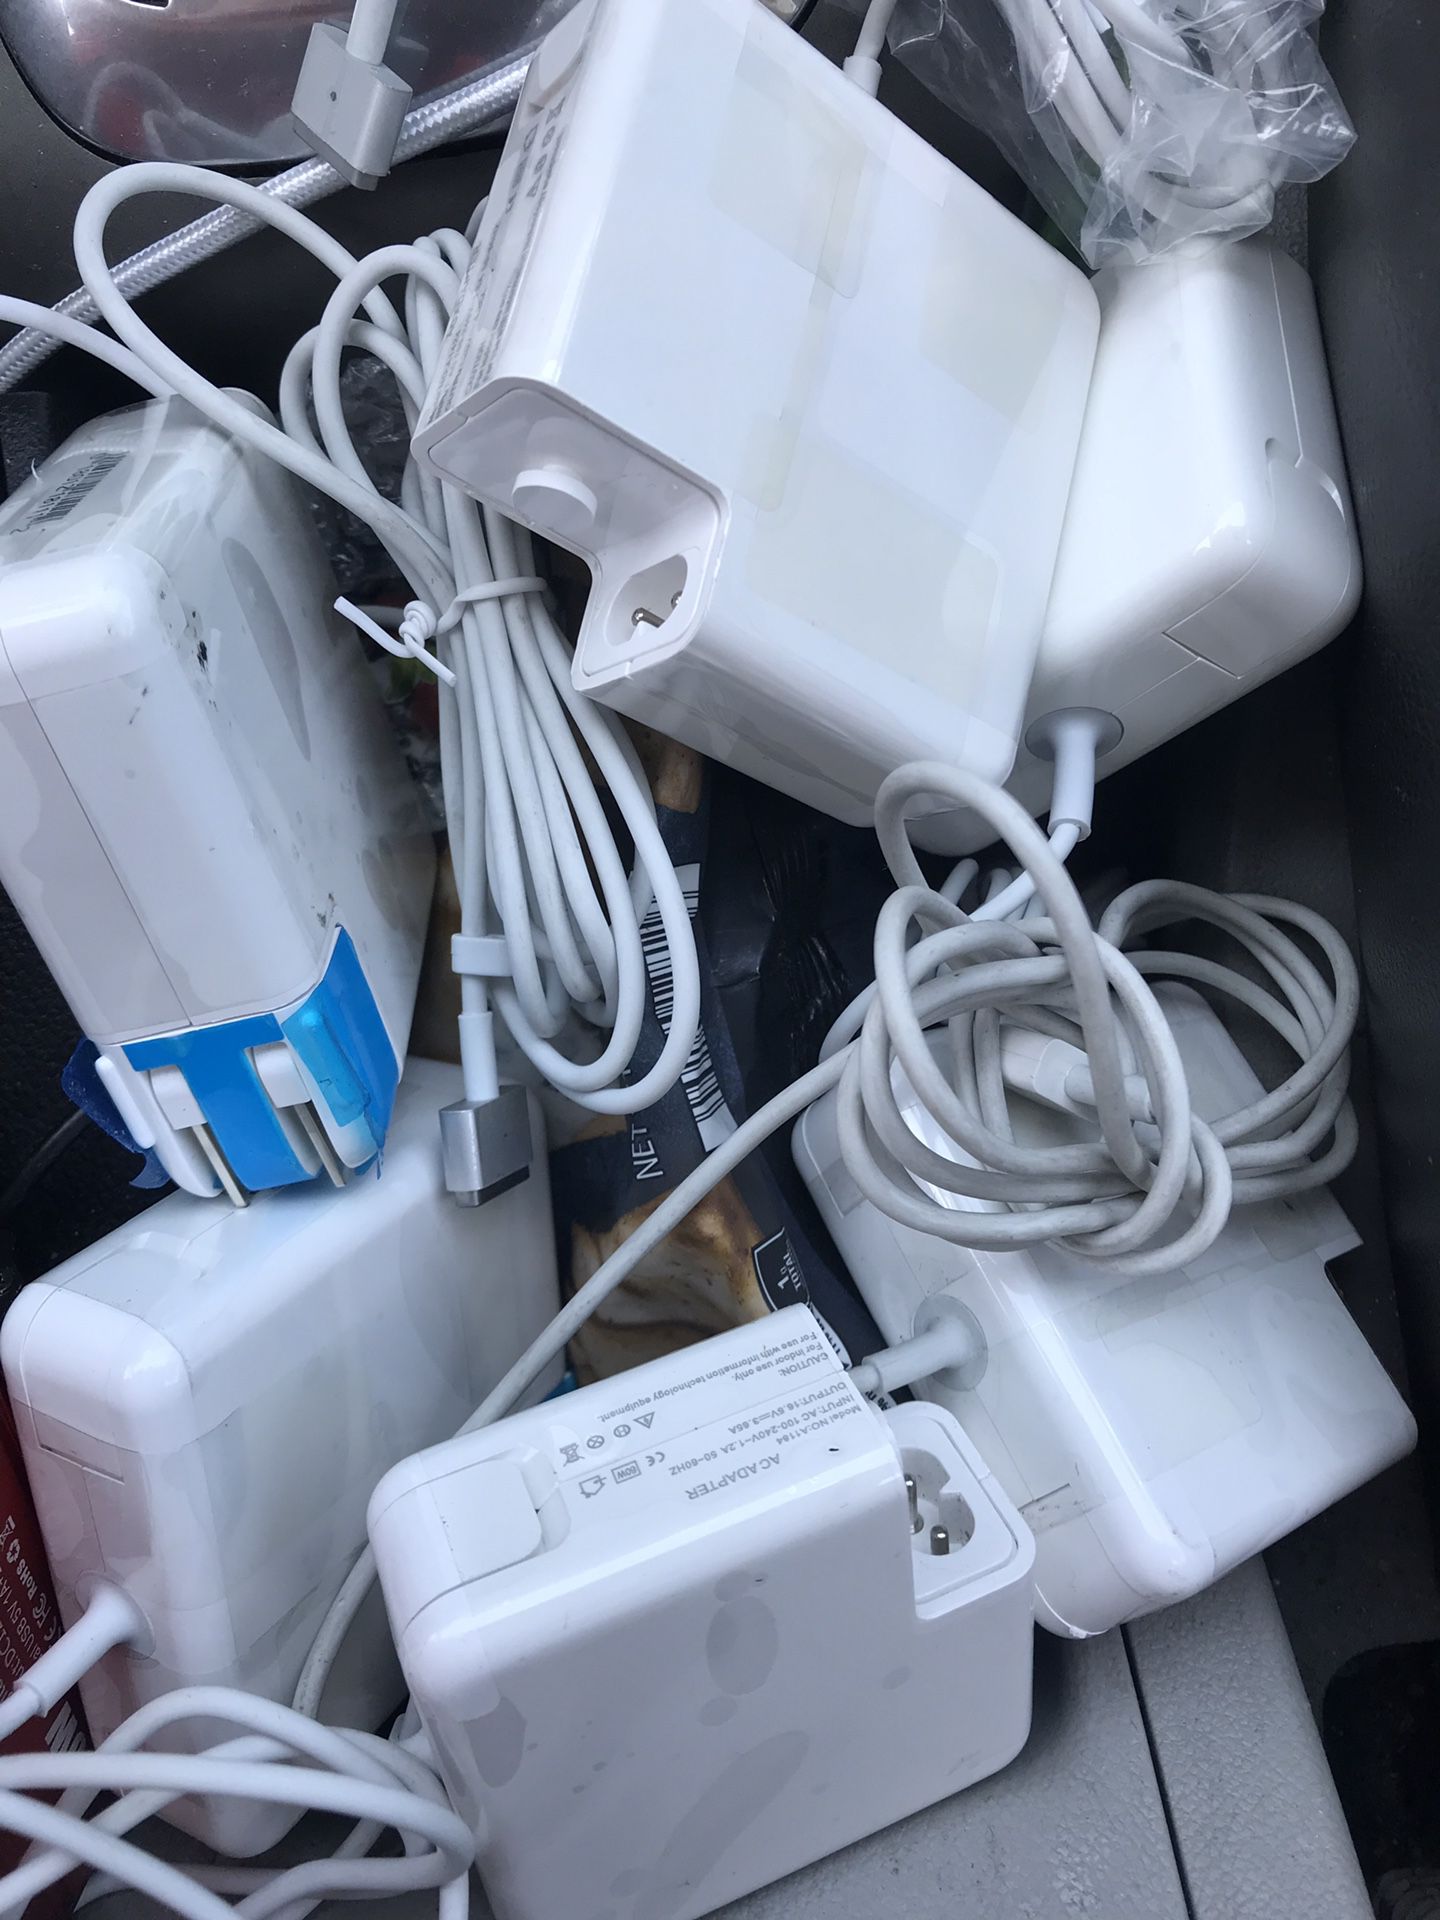 MacBook Pro/Retina/Air New Charger for Any Year and Any Model from 2004 to 2020 for Sale